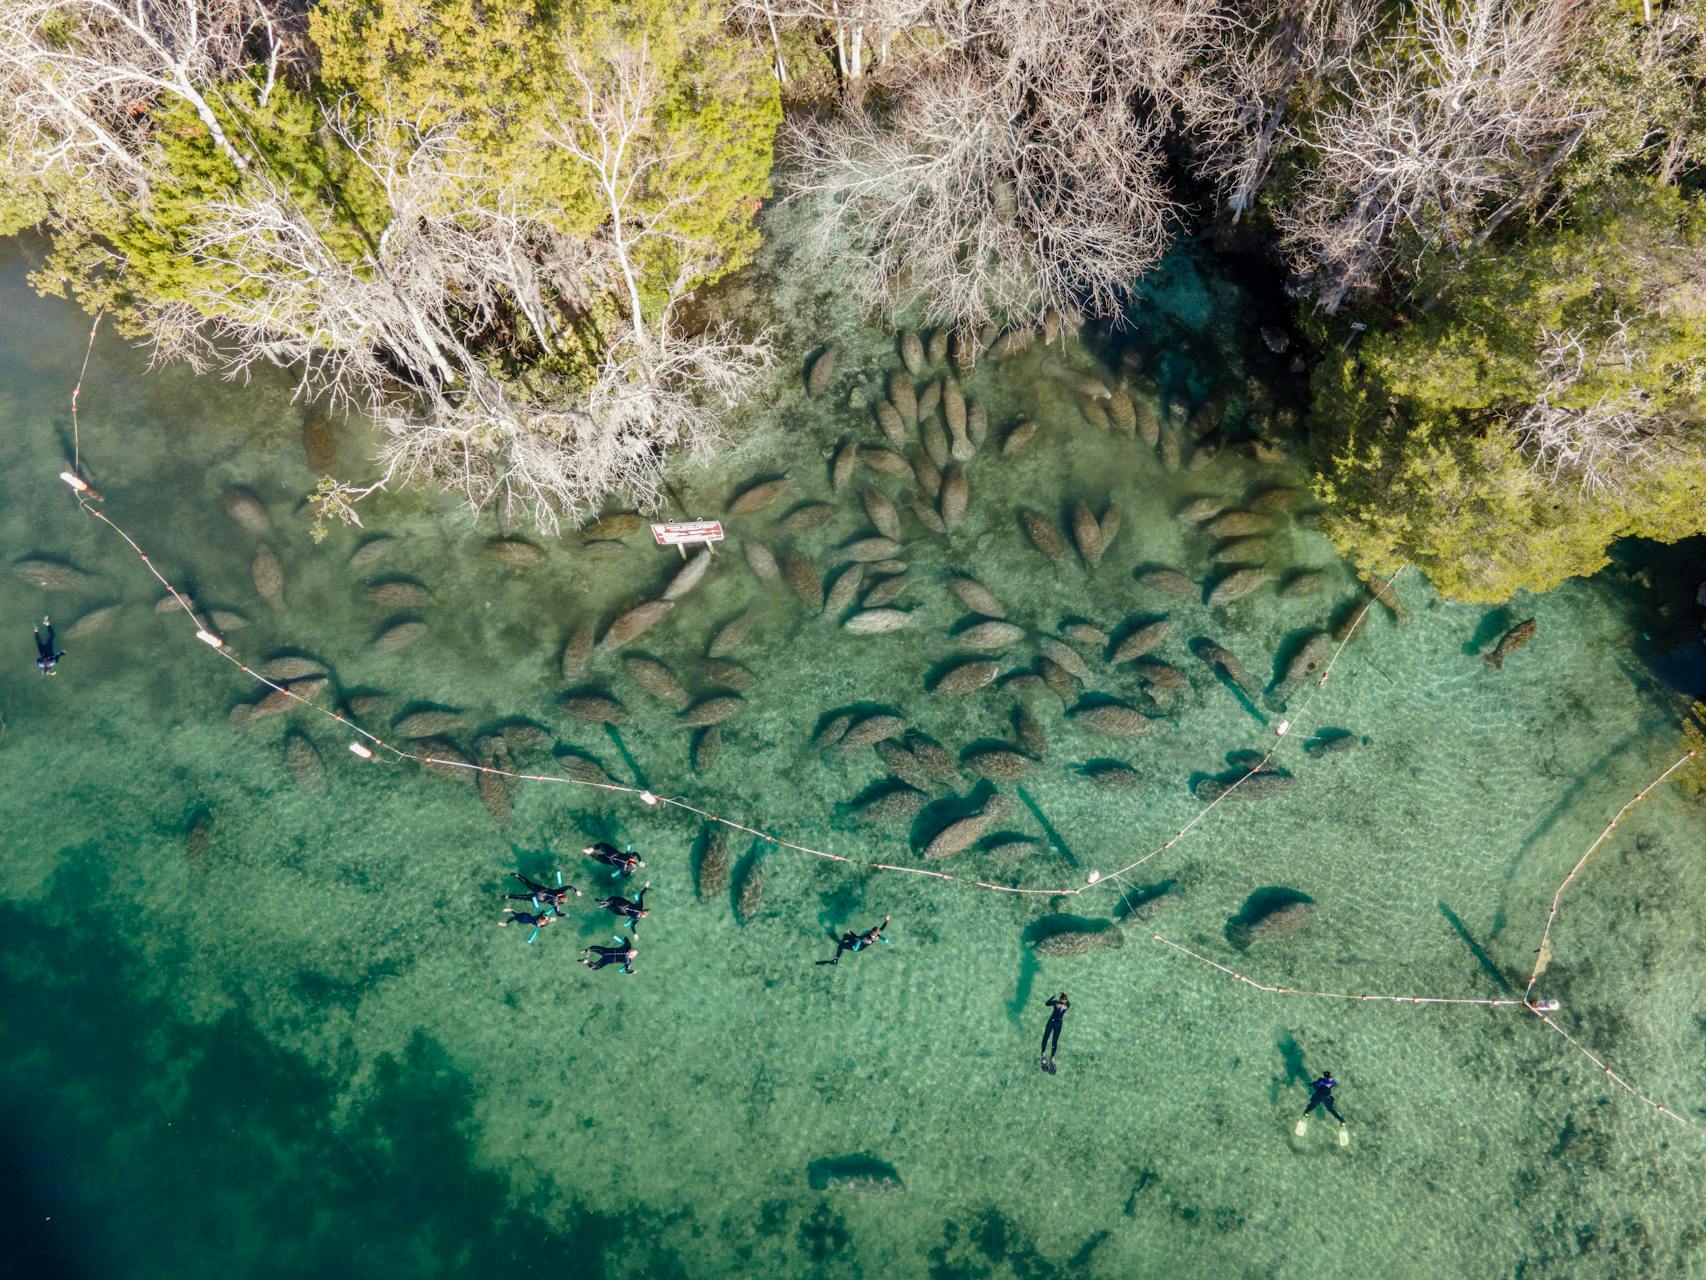 Snorkeling with manatees in Crystal River, Fla.